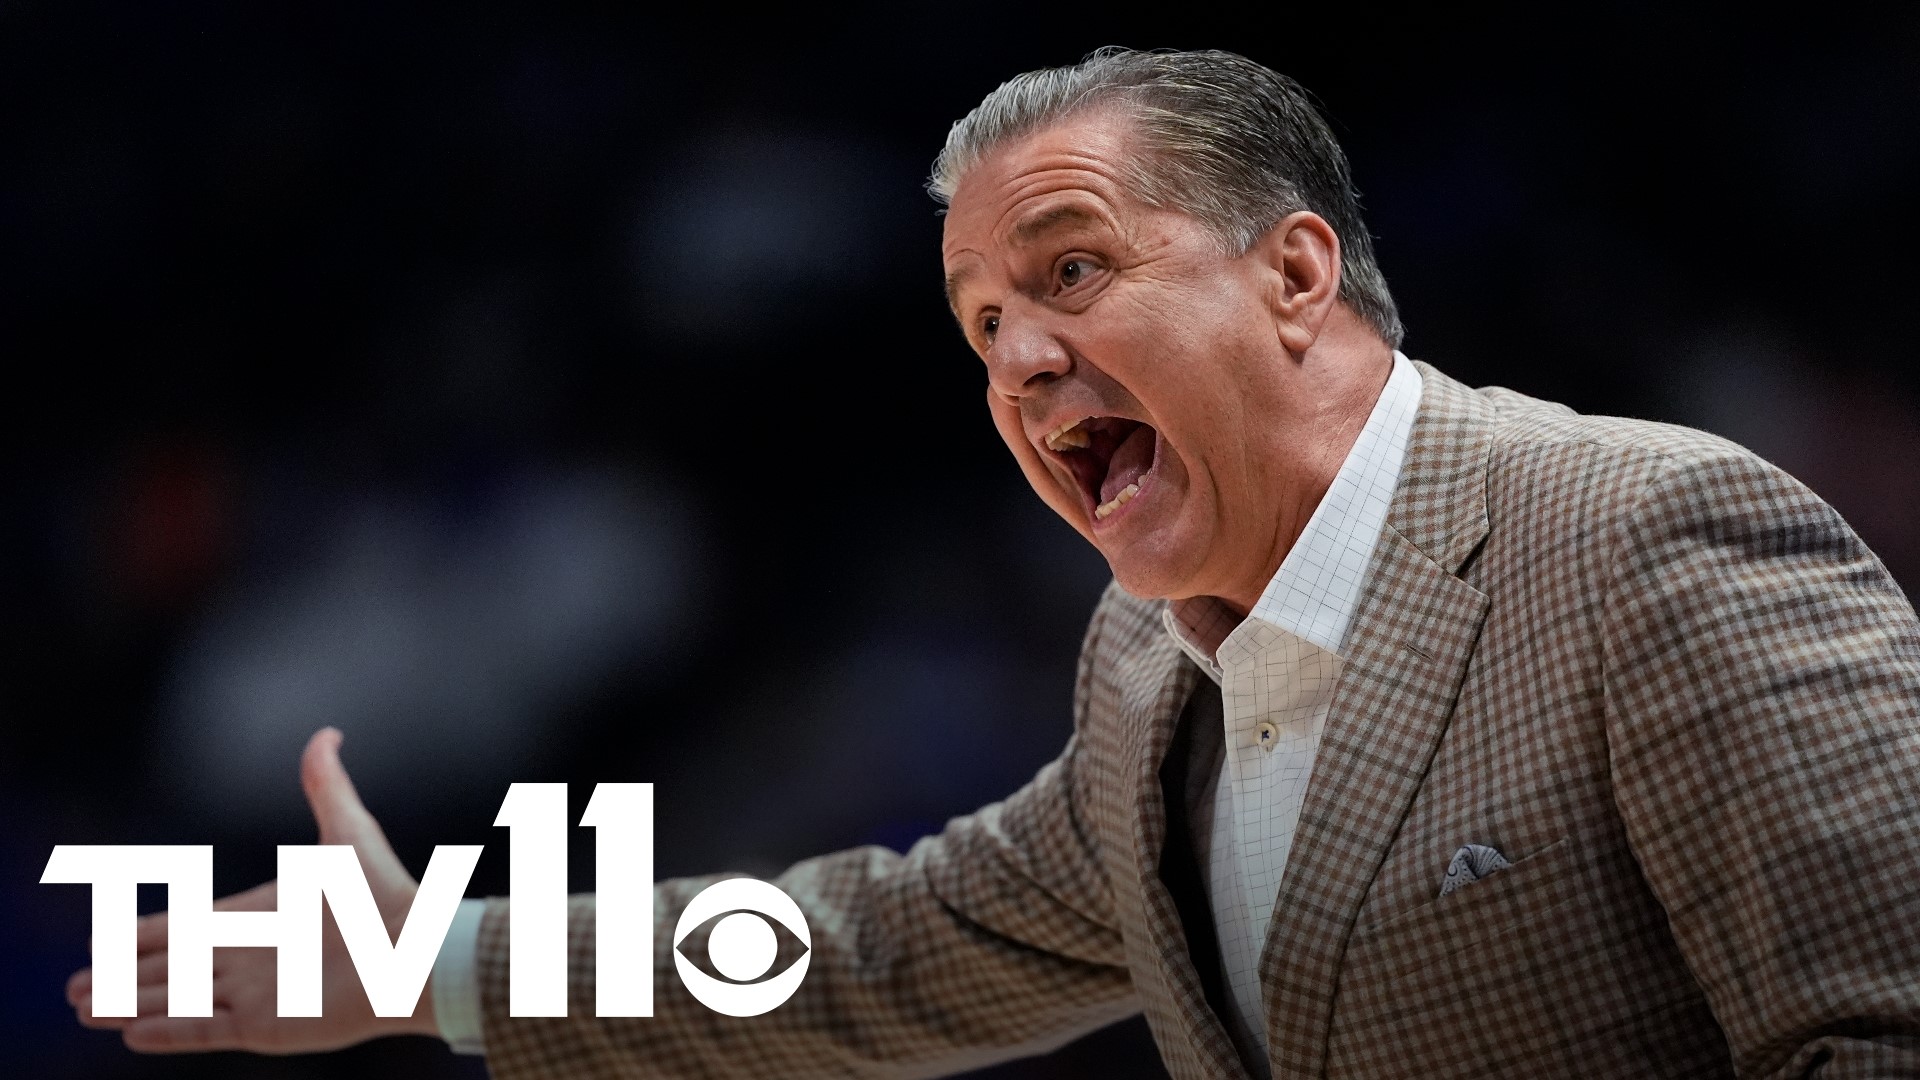 The Razorback's new coach announcement is expected today, and Kentucky's John Calipari has been on the radar. Here's a look at the impact it'll have on Hog hoops.